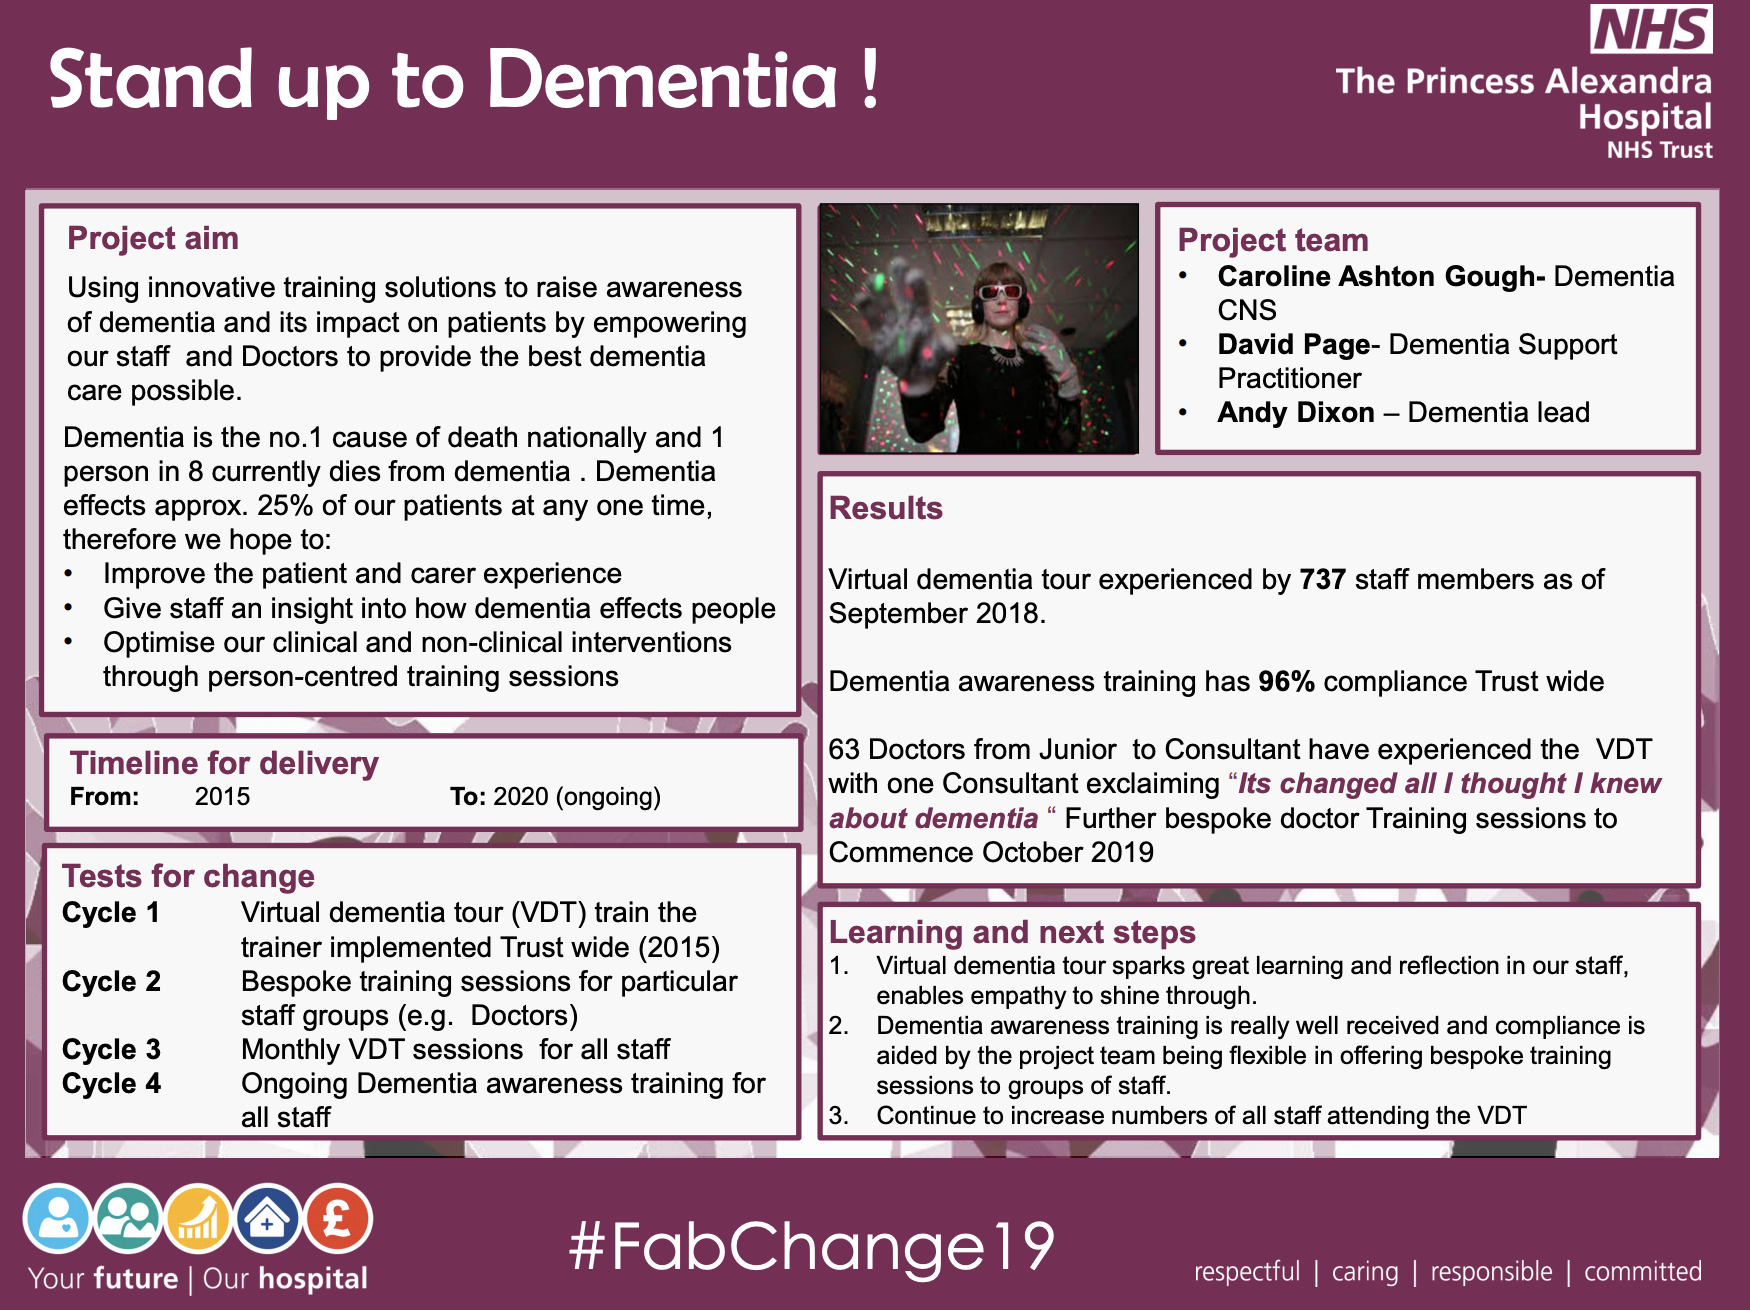 Stand up to Dementia - @QualityFirstPAH featured image